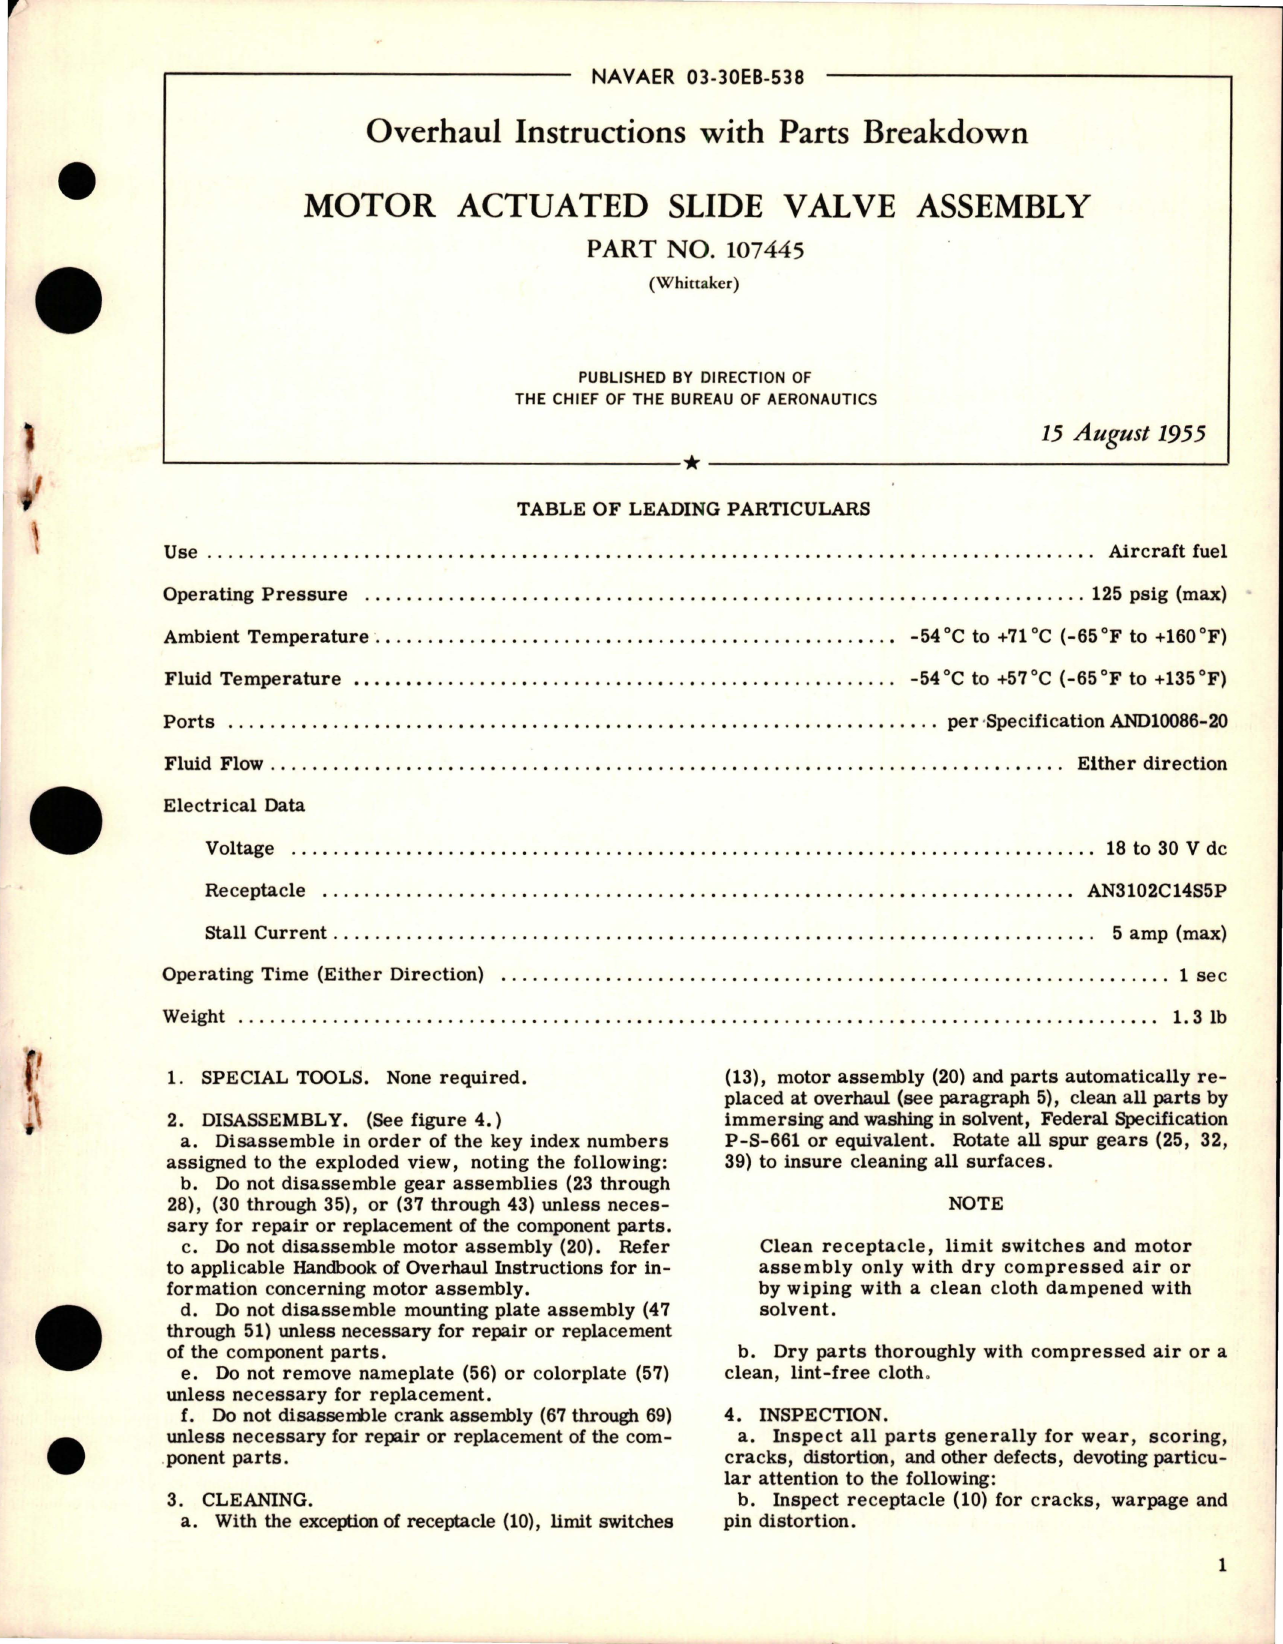 Sample page 1 from AirCorps Library document: Overhaul Instructions with Parts for Motor Actuated Slide Valve Assembly - Part 107445